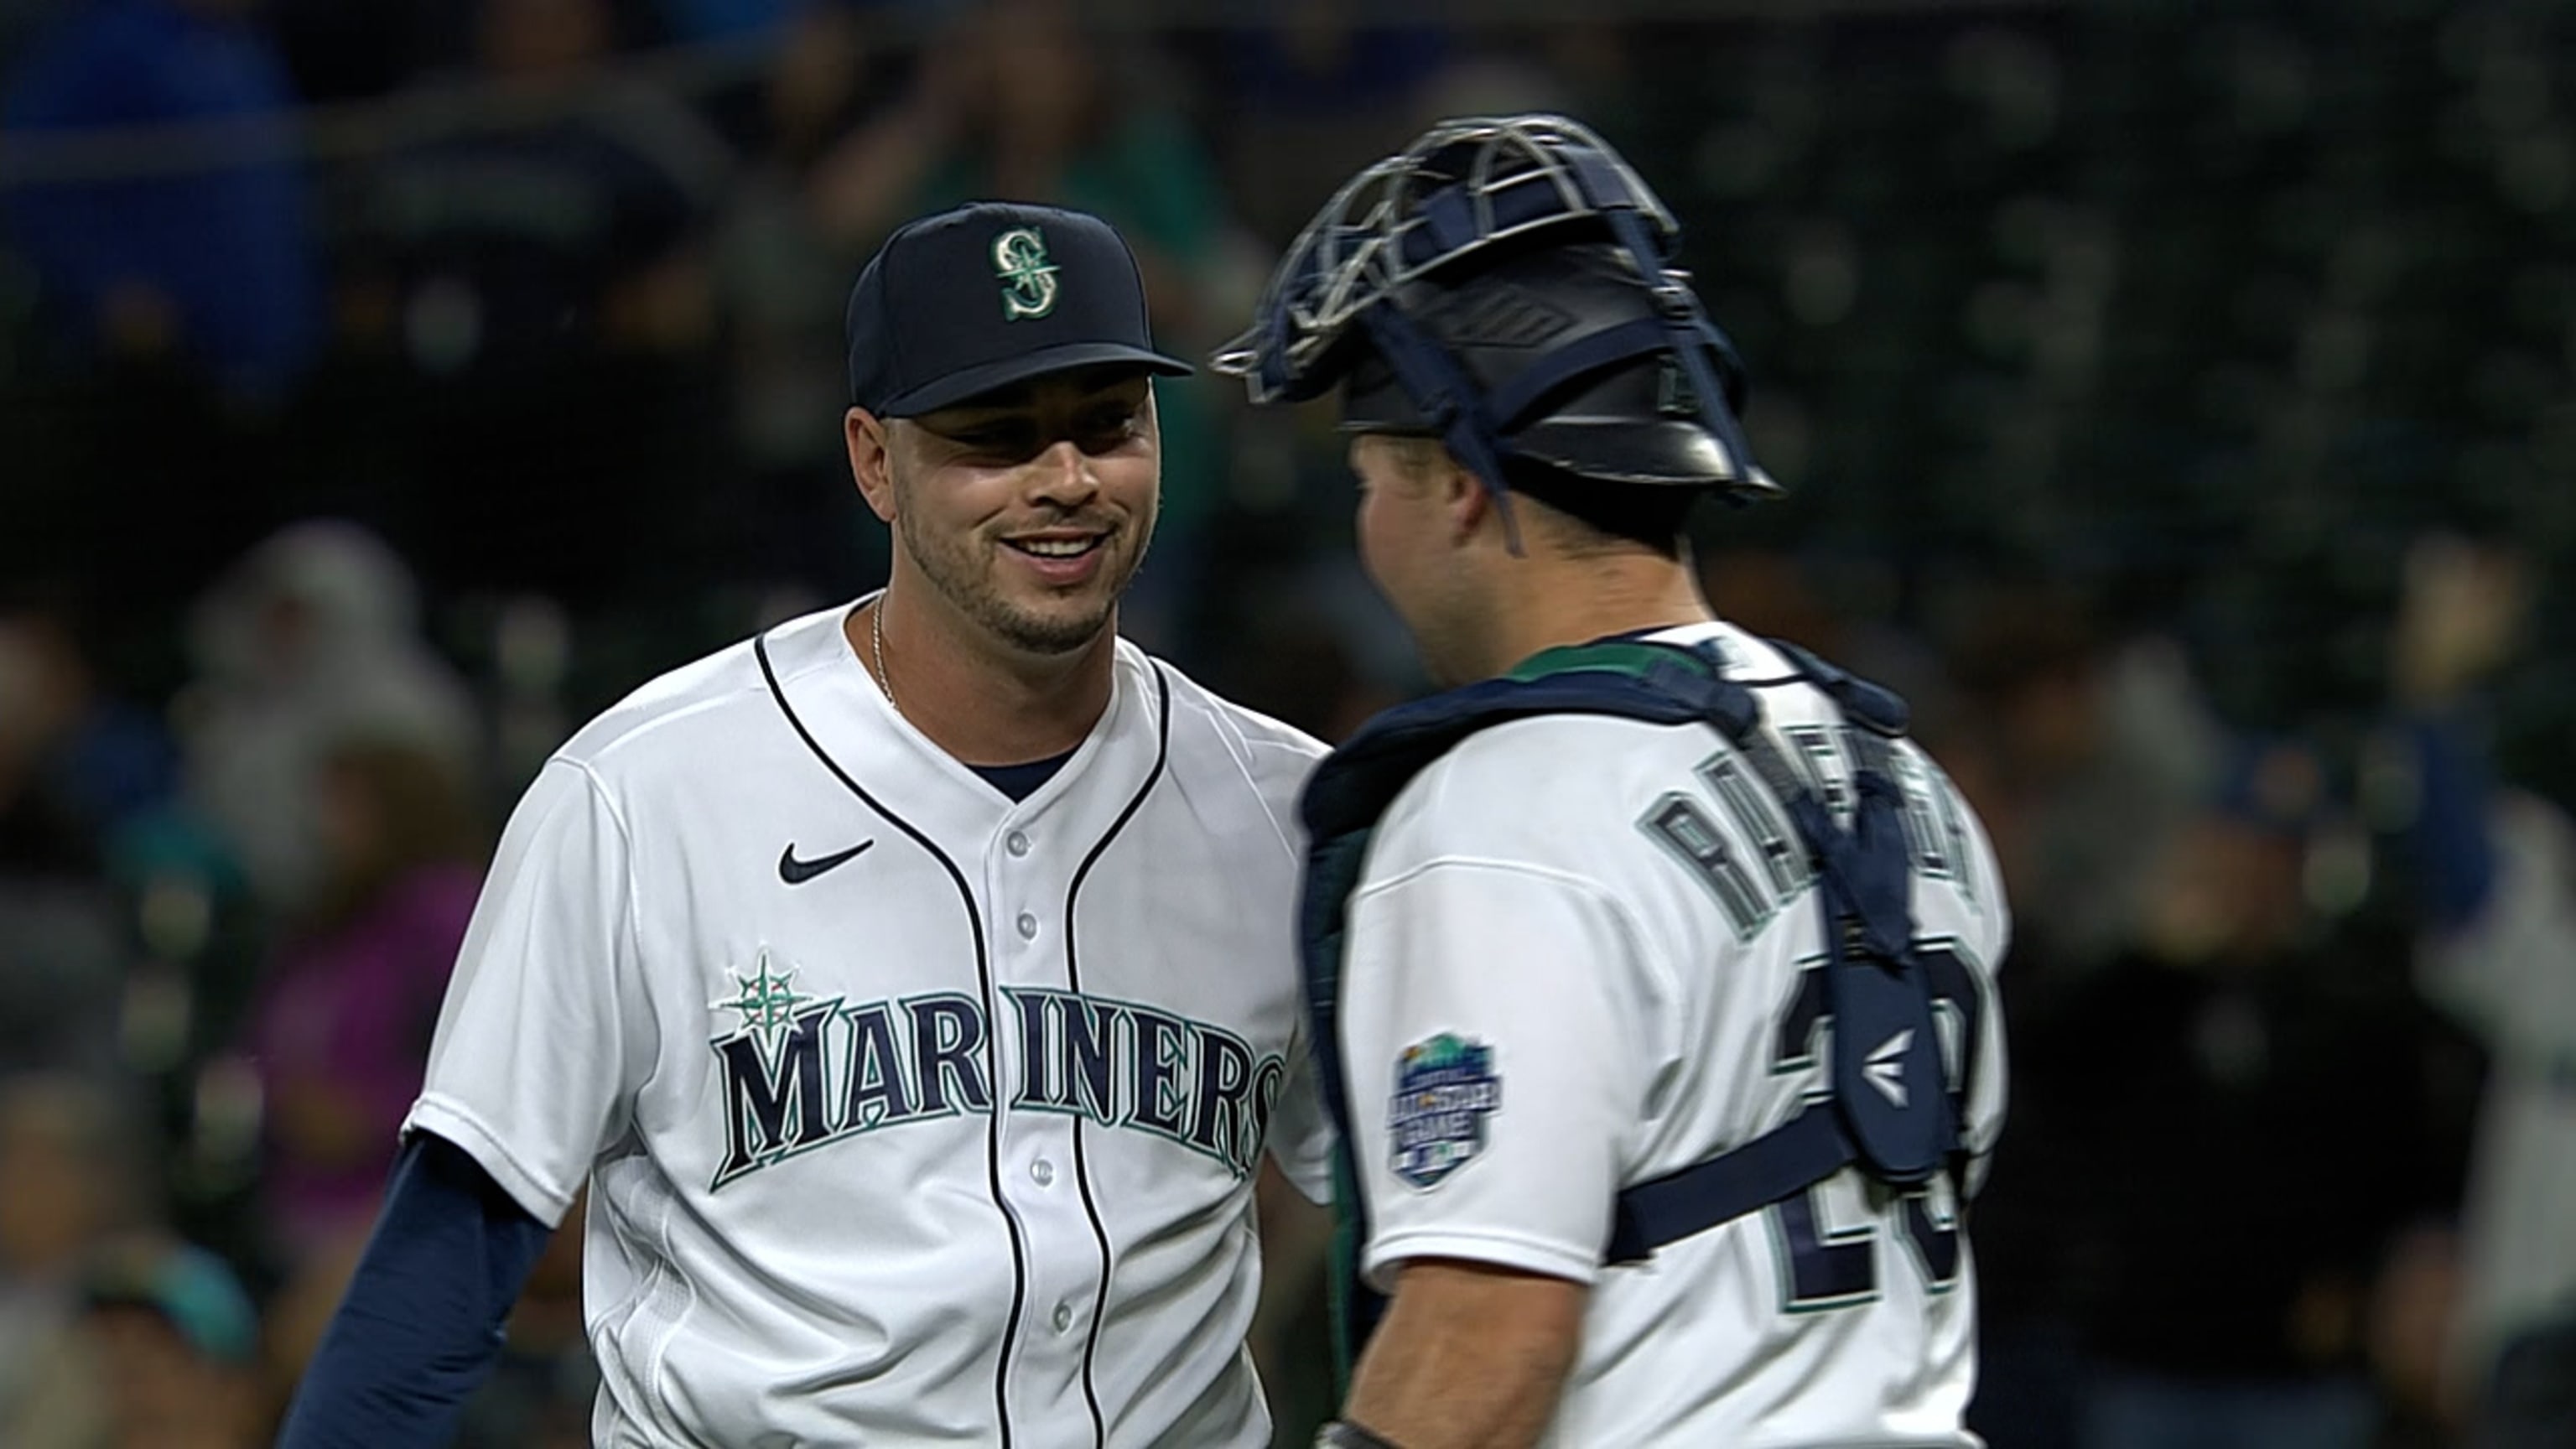 Seattle Mariners - Every day until the end of the season, the